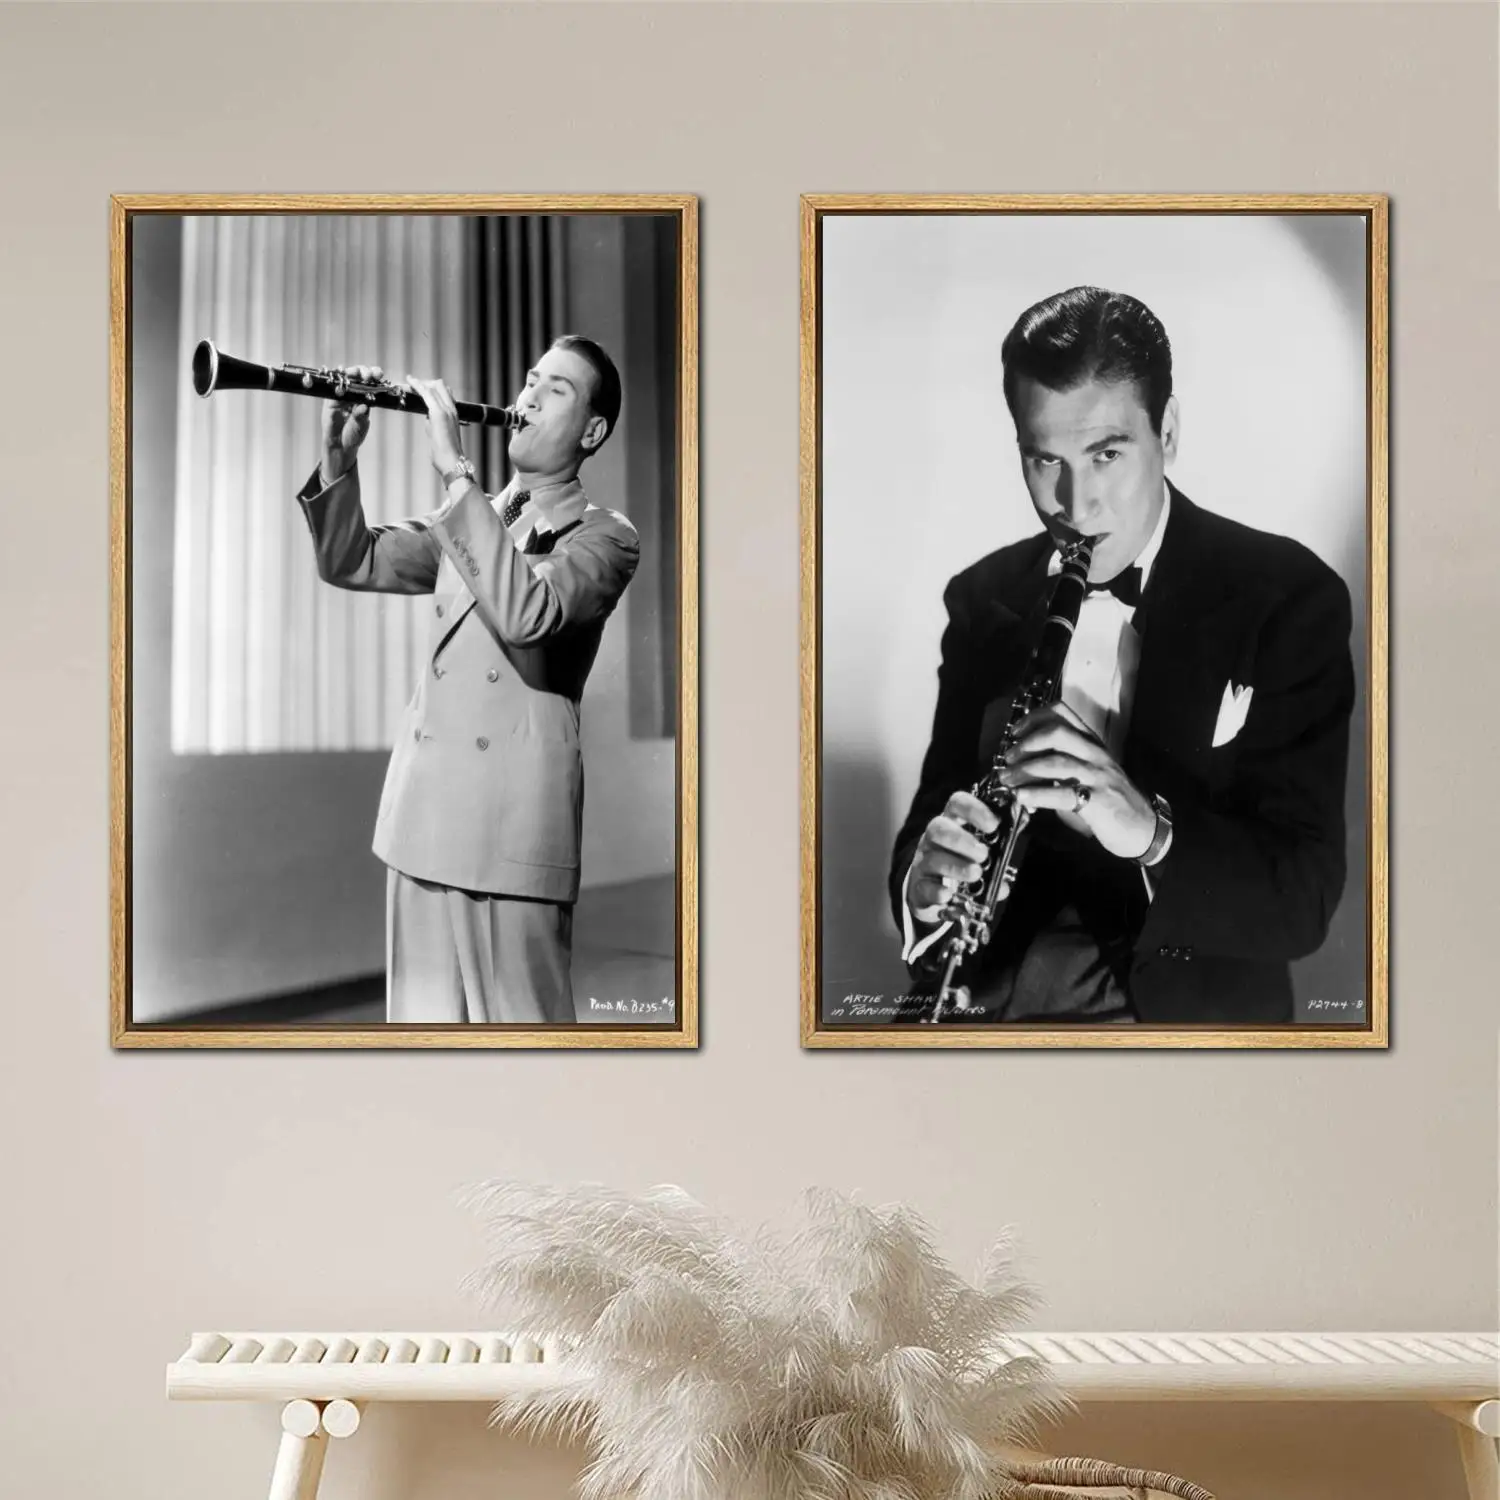 Artie Shaw Poster Painting 24x36 Wall Art Canvas Posters room decor Modern Family bedroom Decoration Art wall decor